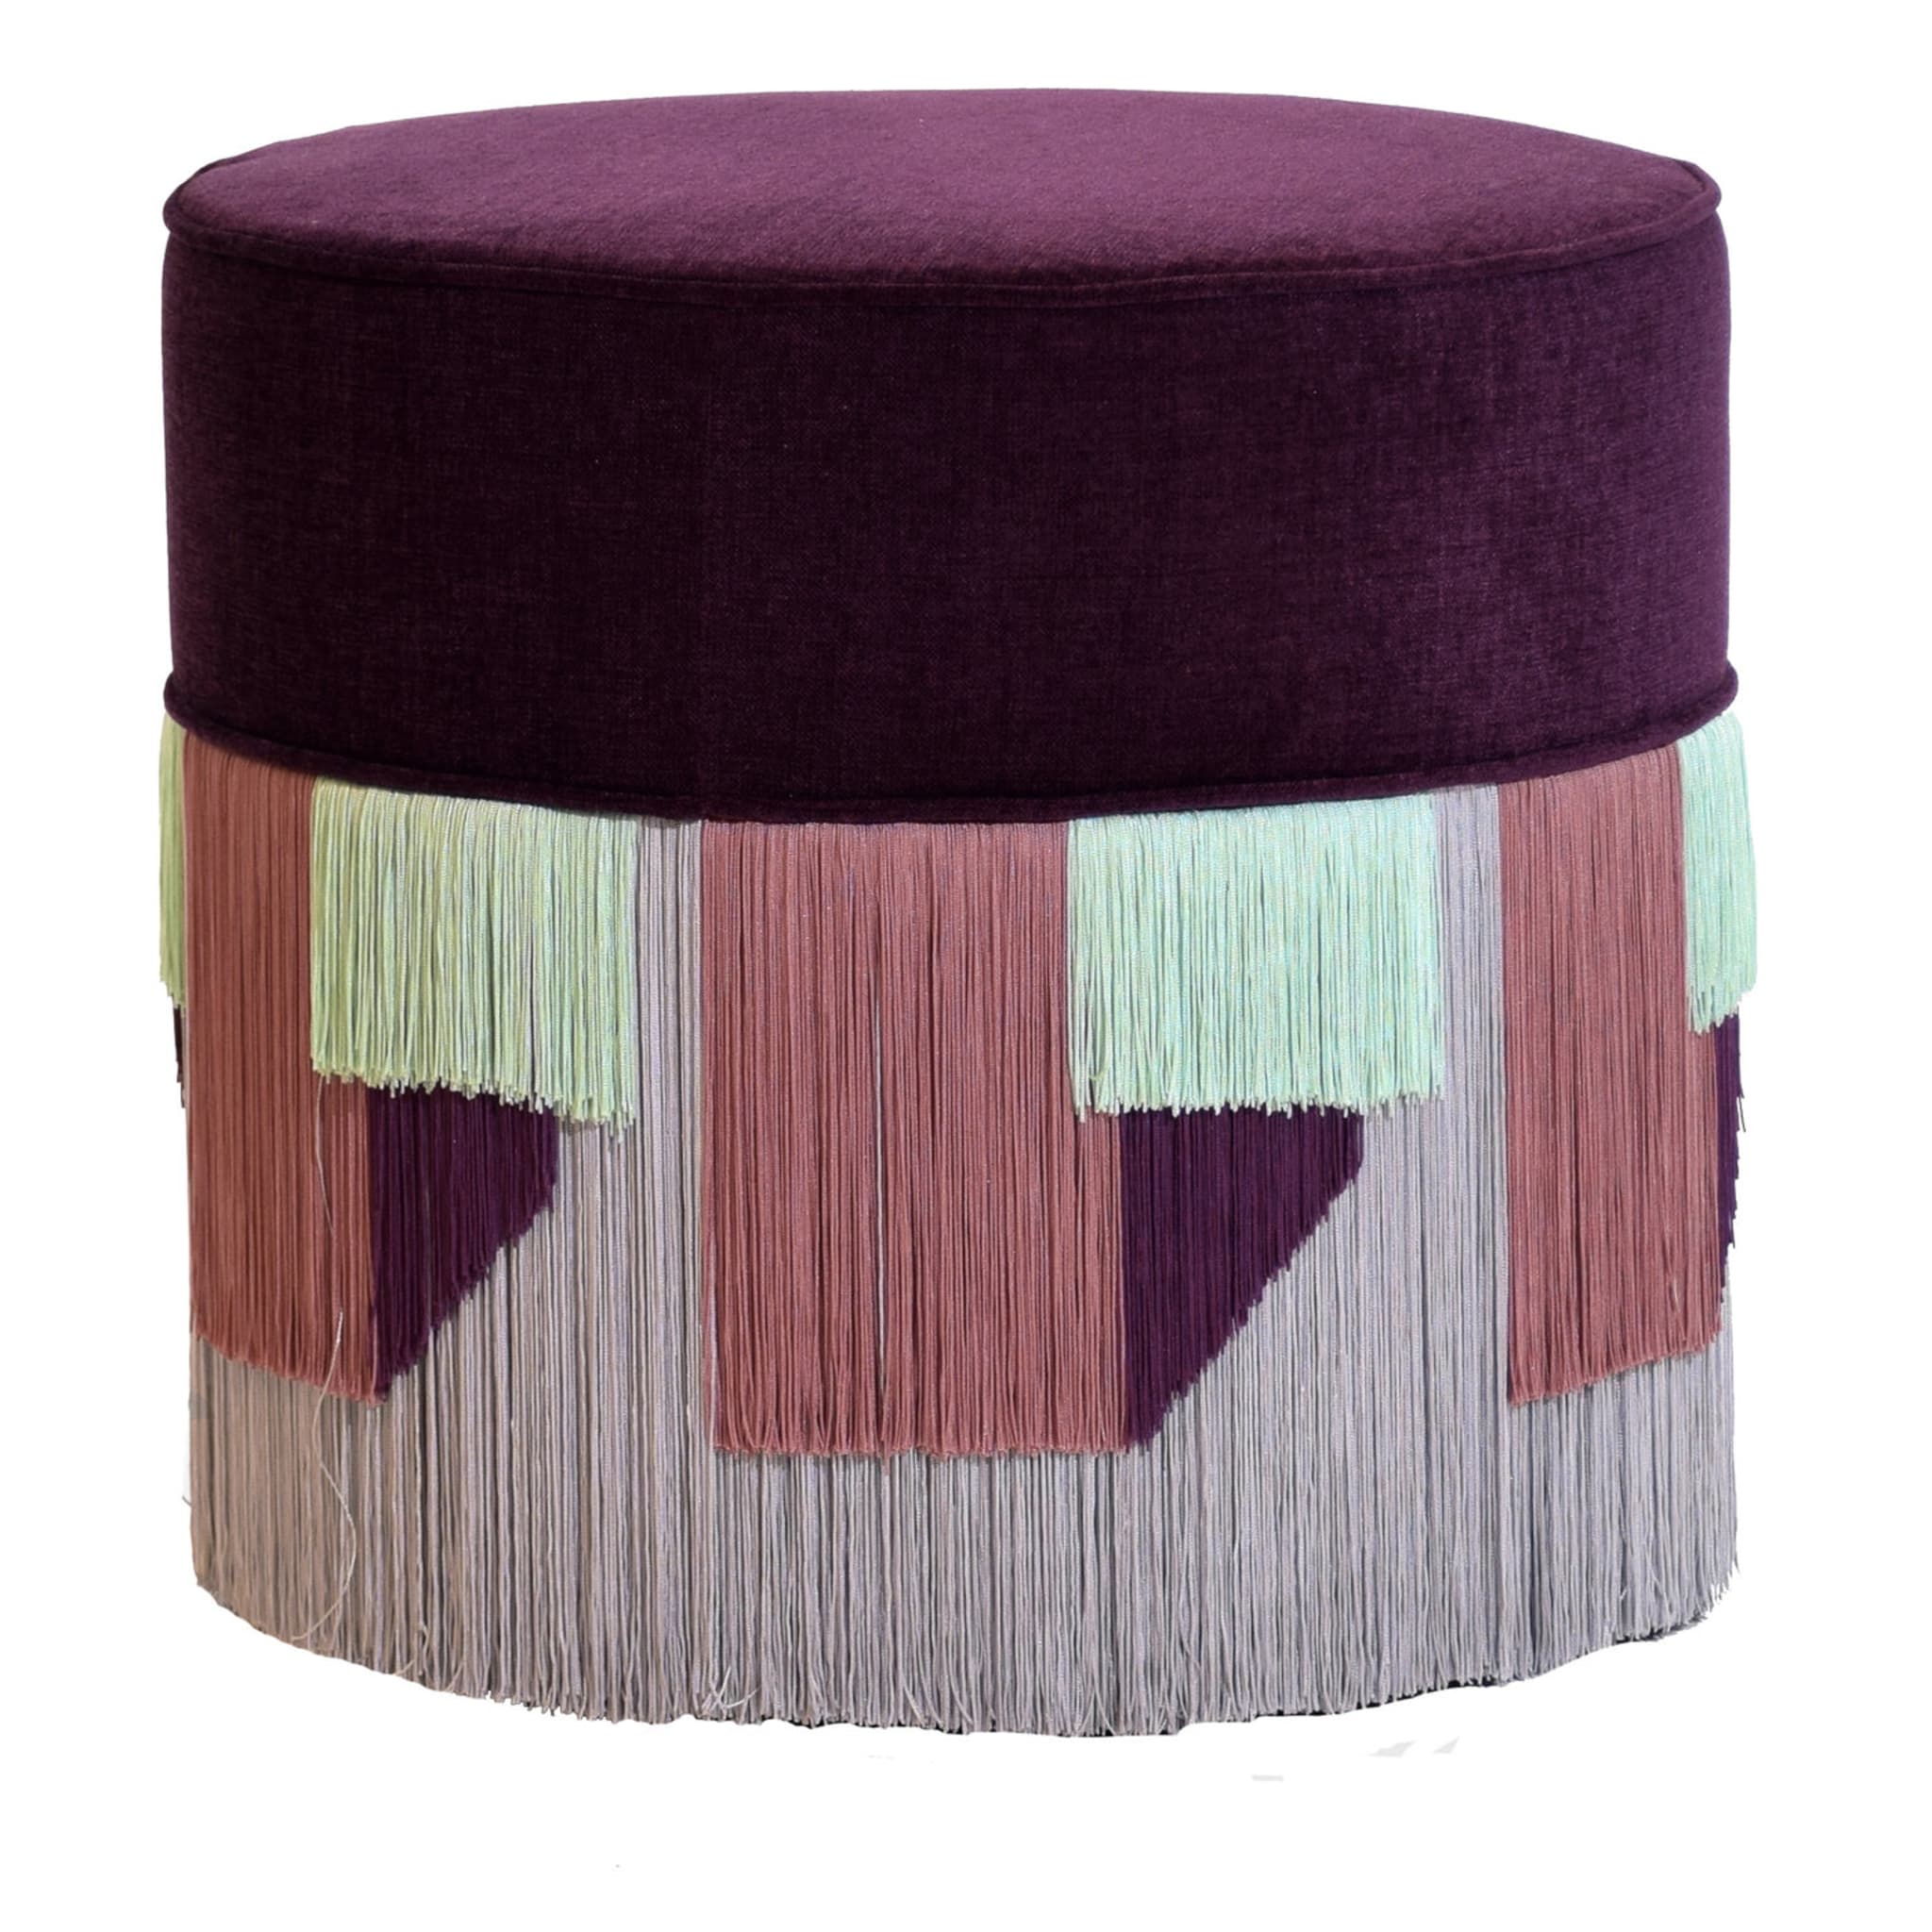 Couture Violet Pouf with Geometric Fringe - Main view